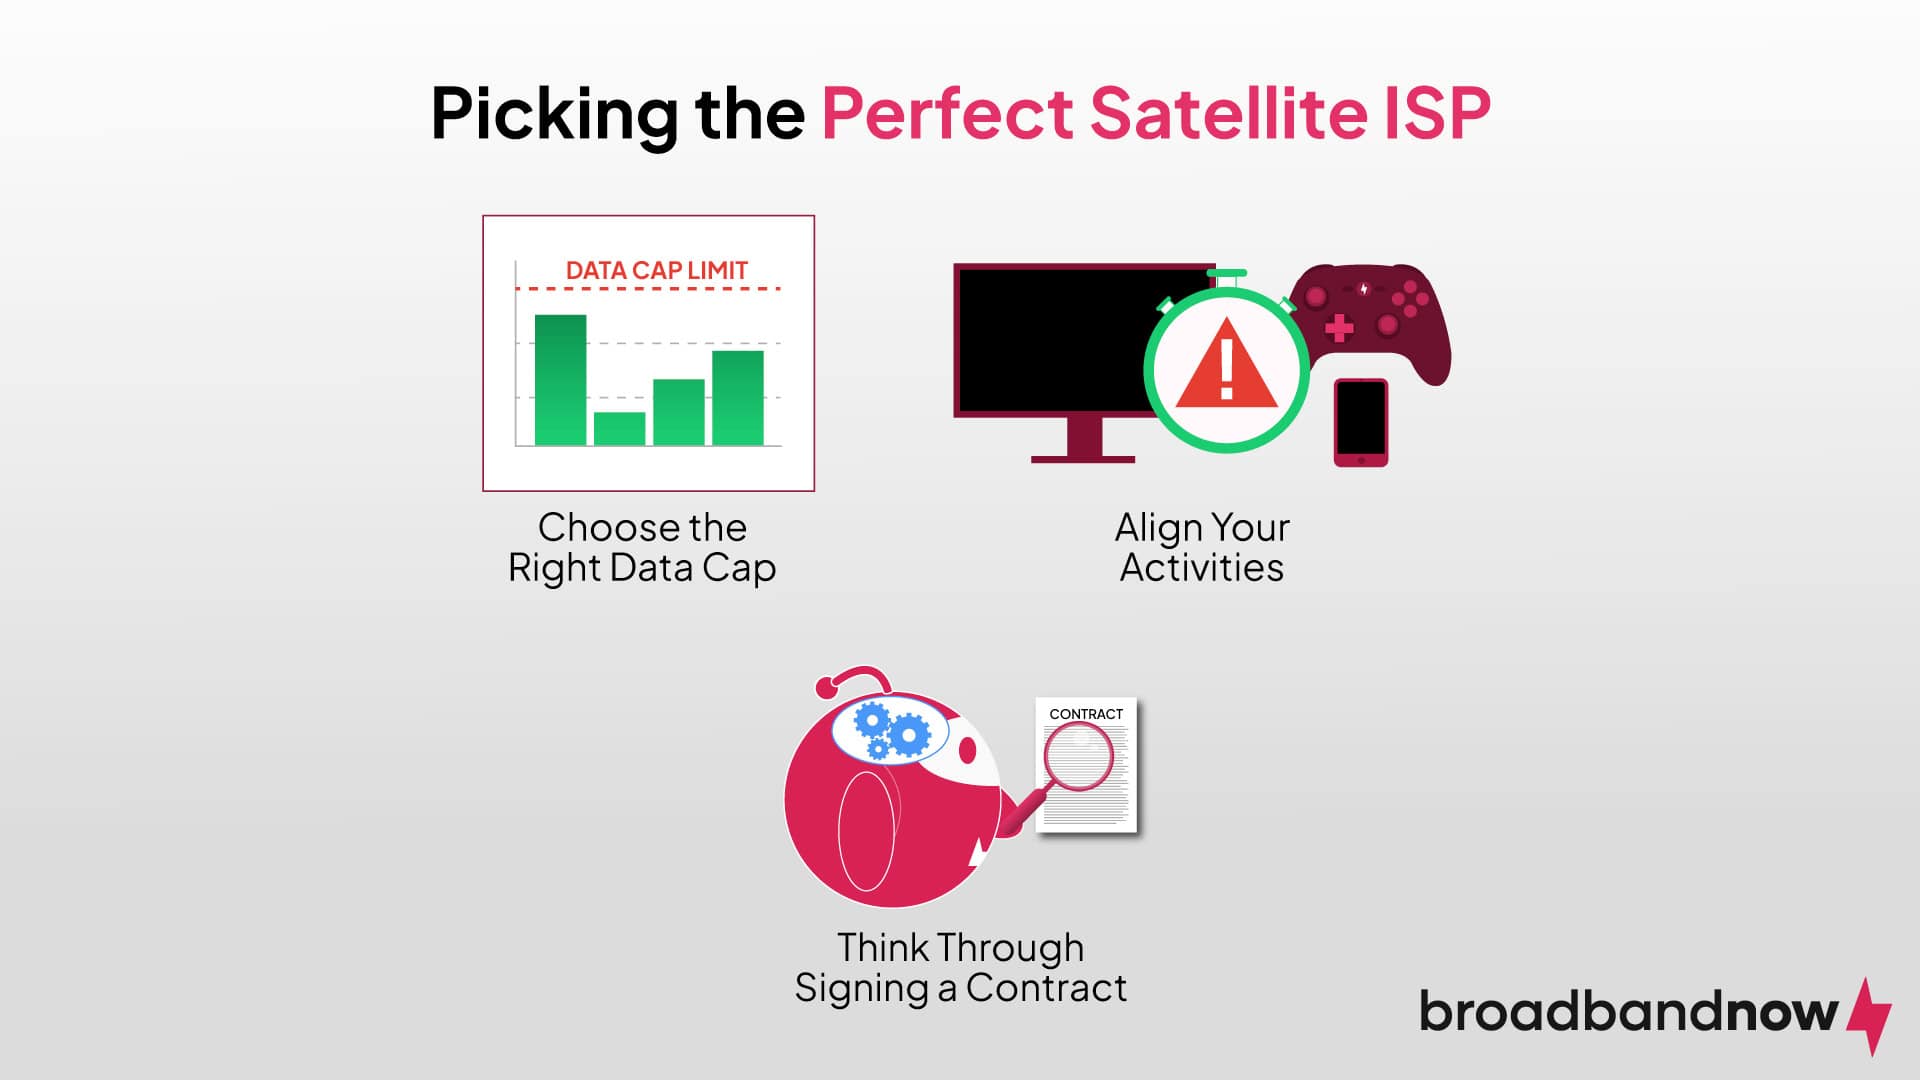 Graphic demonstrating the three methods for picking a perfect satellite ISP